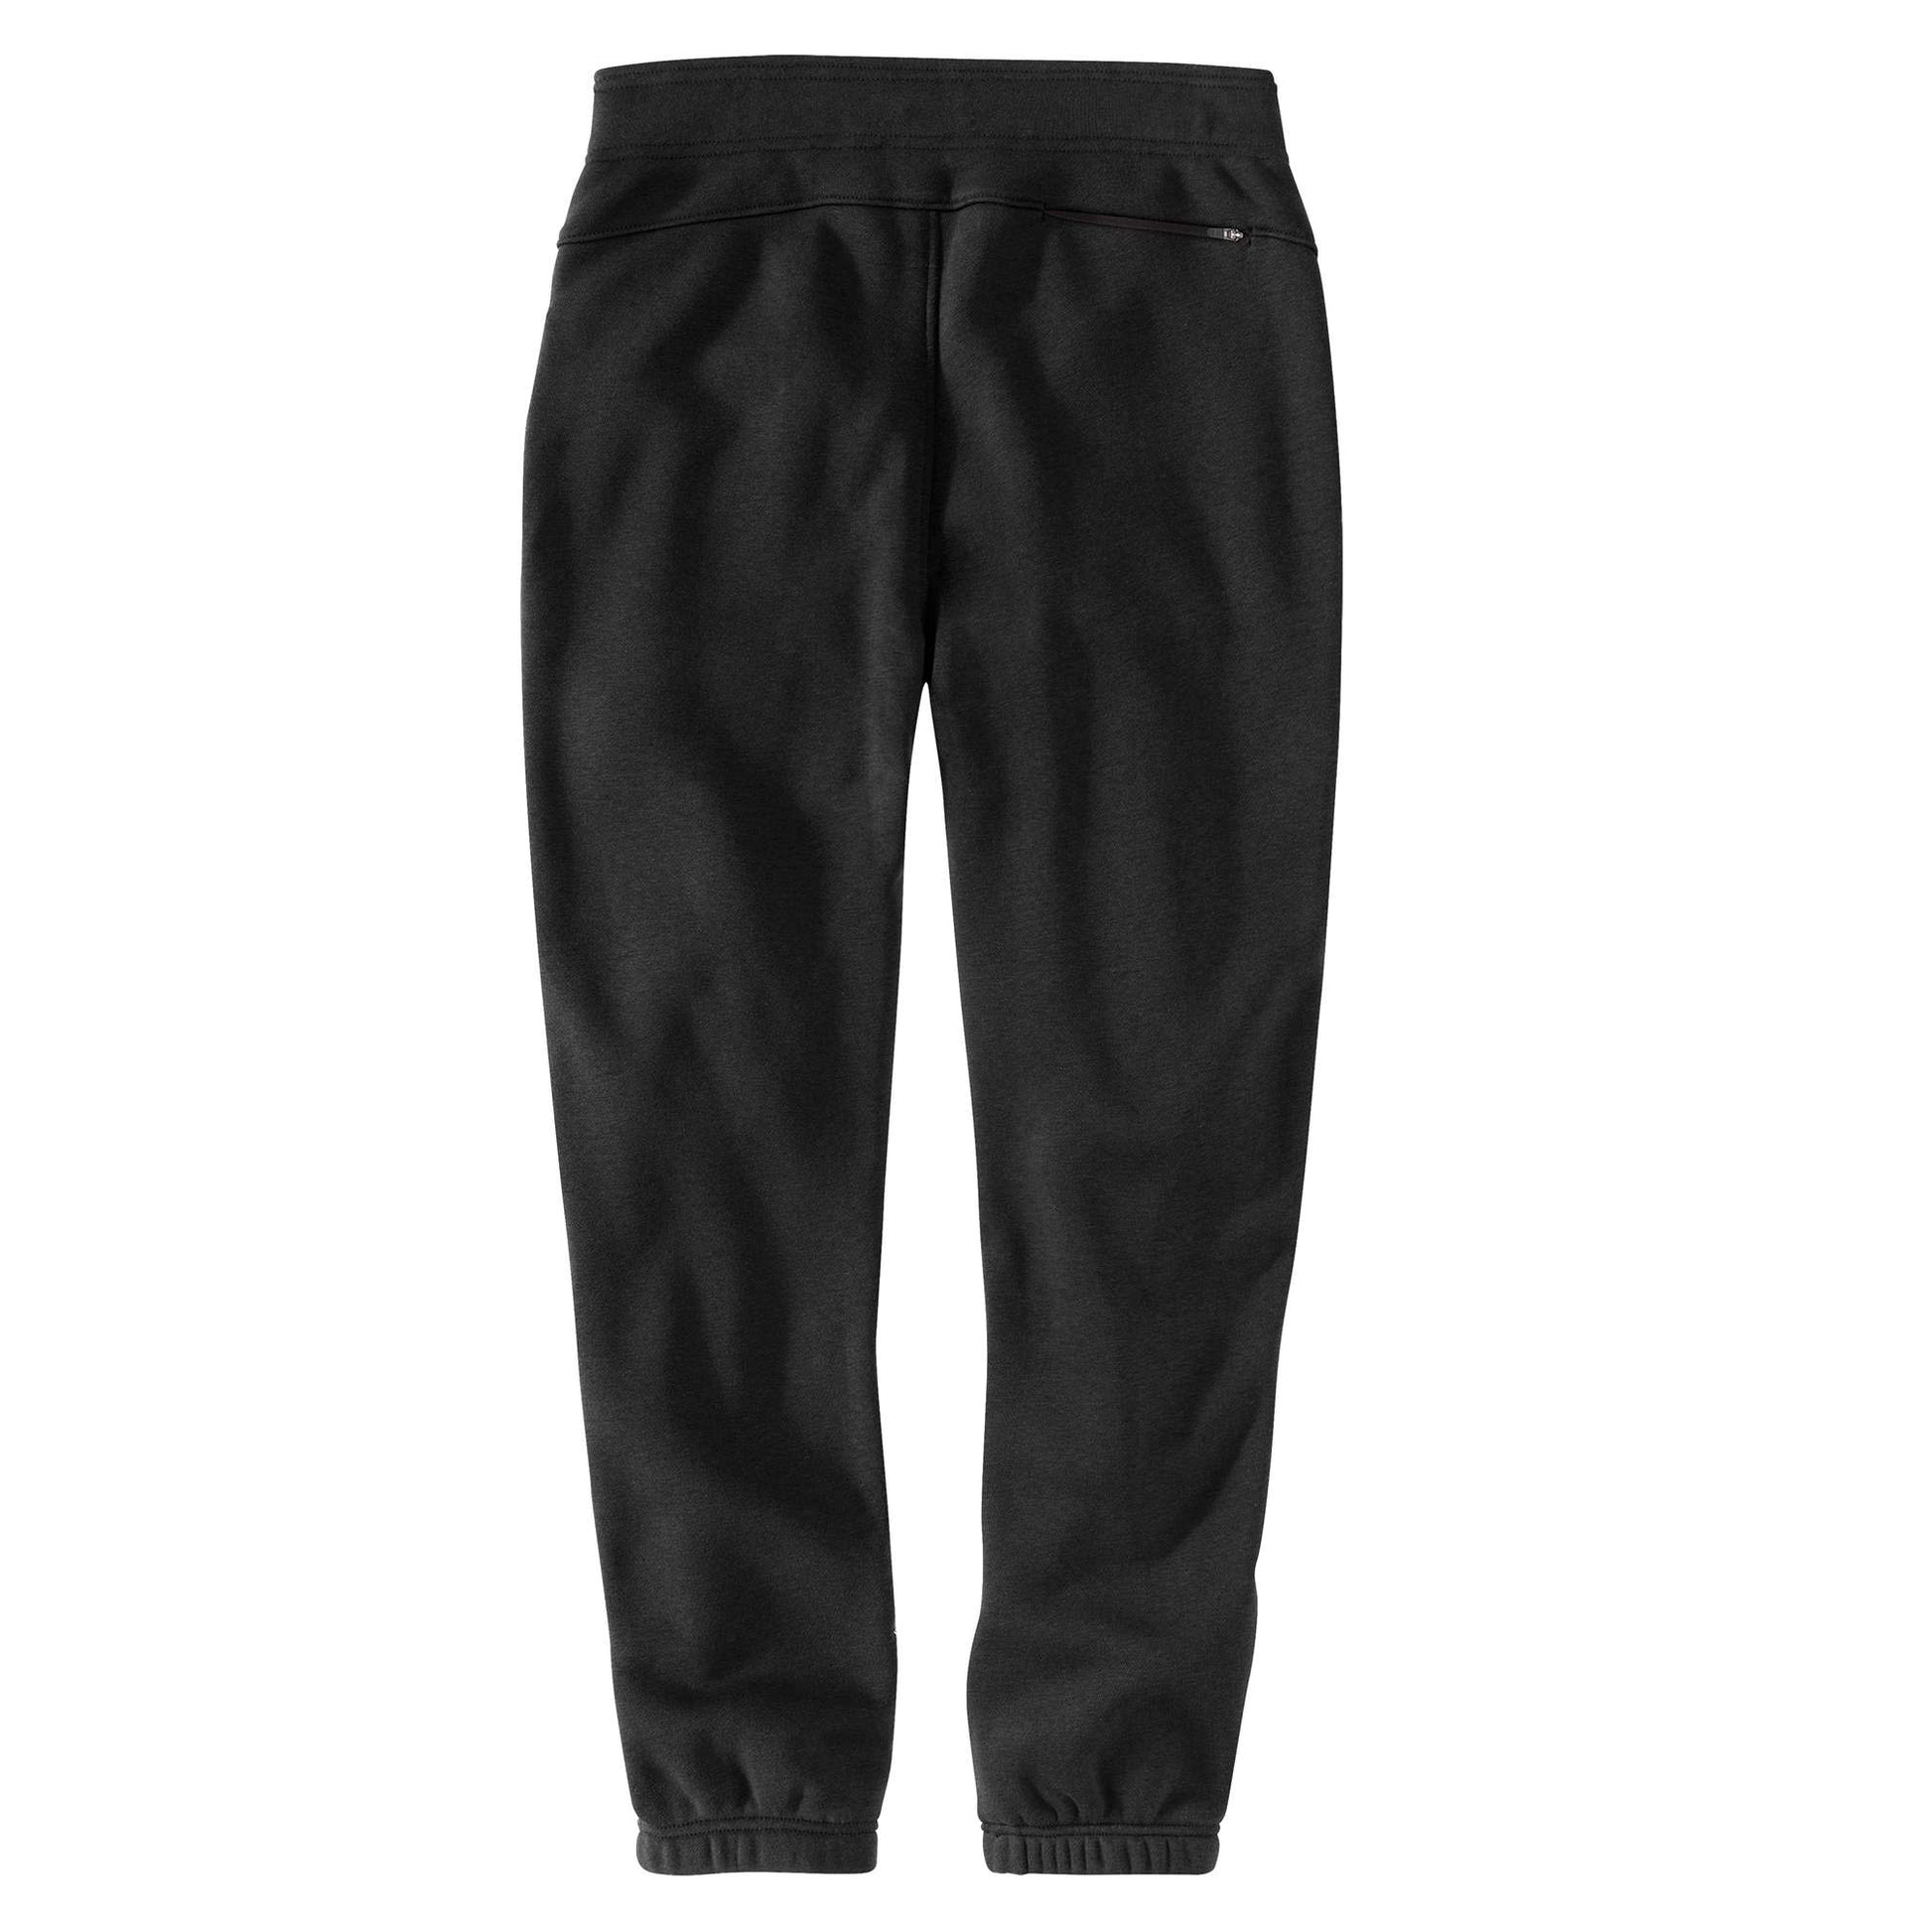 New North Relaxed Fit Jogger Pants for Women